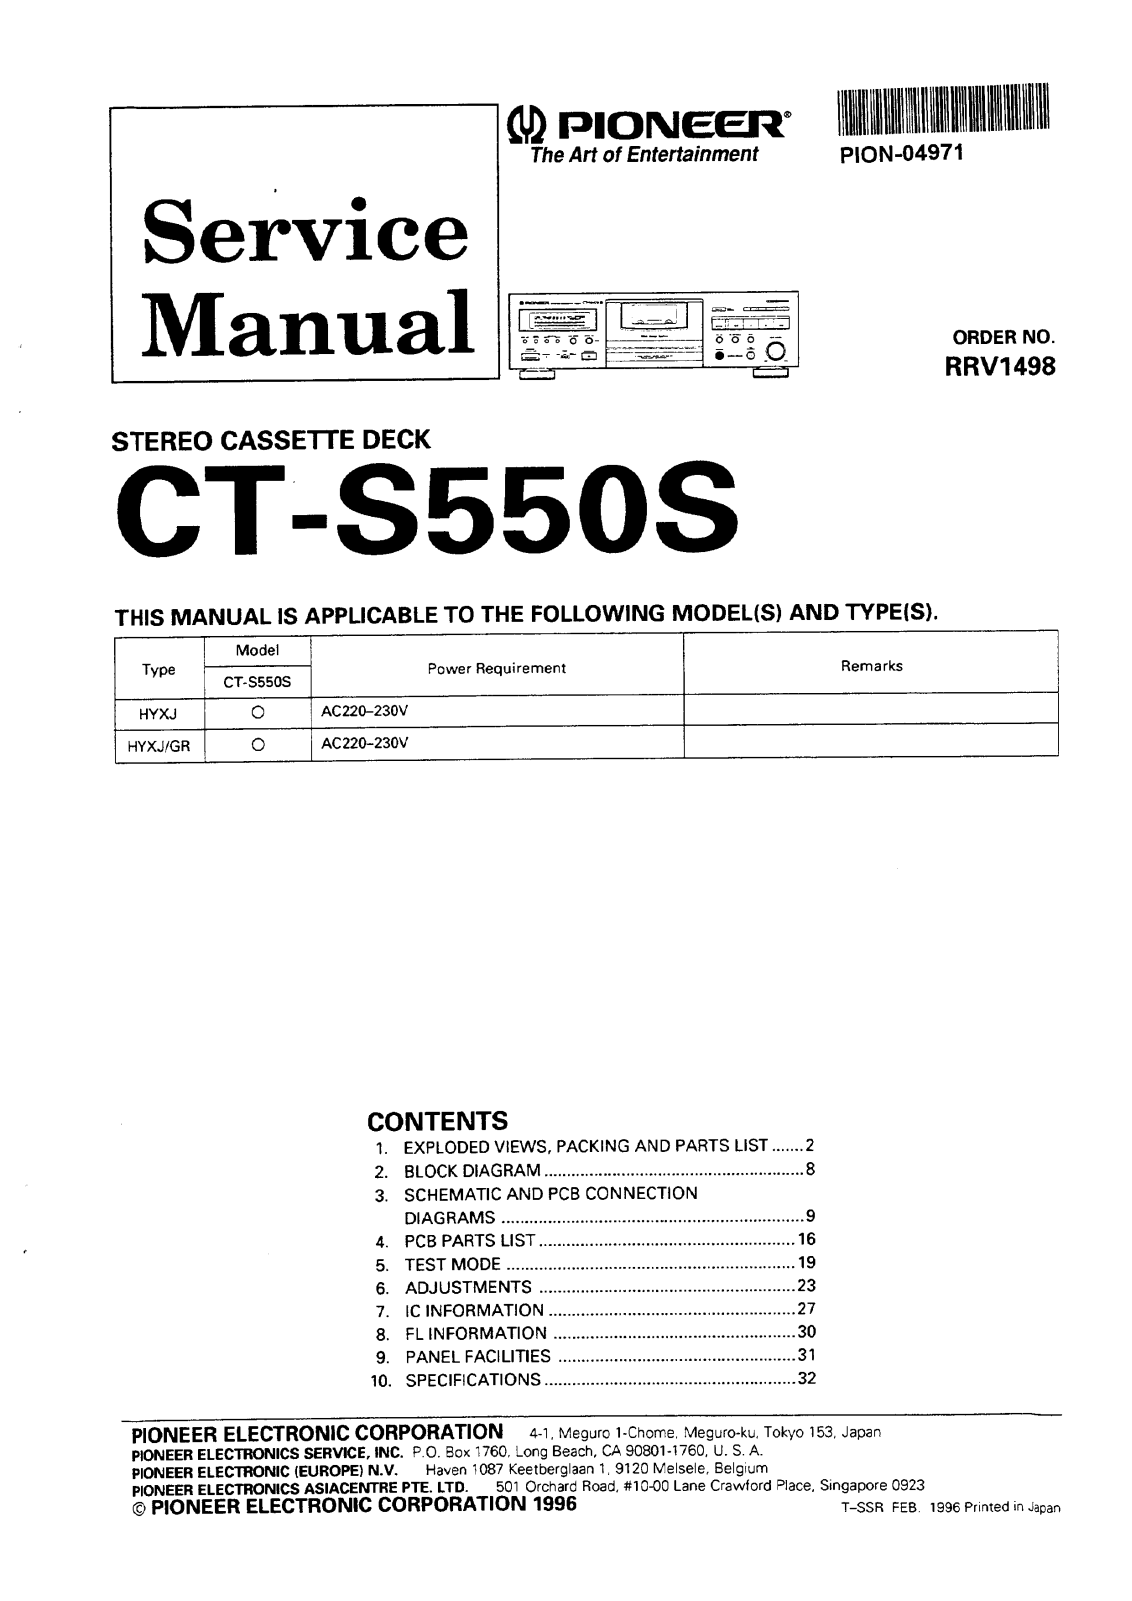 Pioneer CTS-550-S Service manual